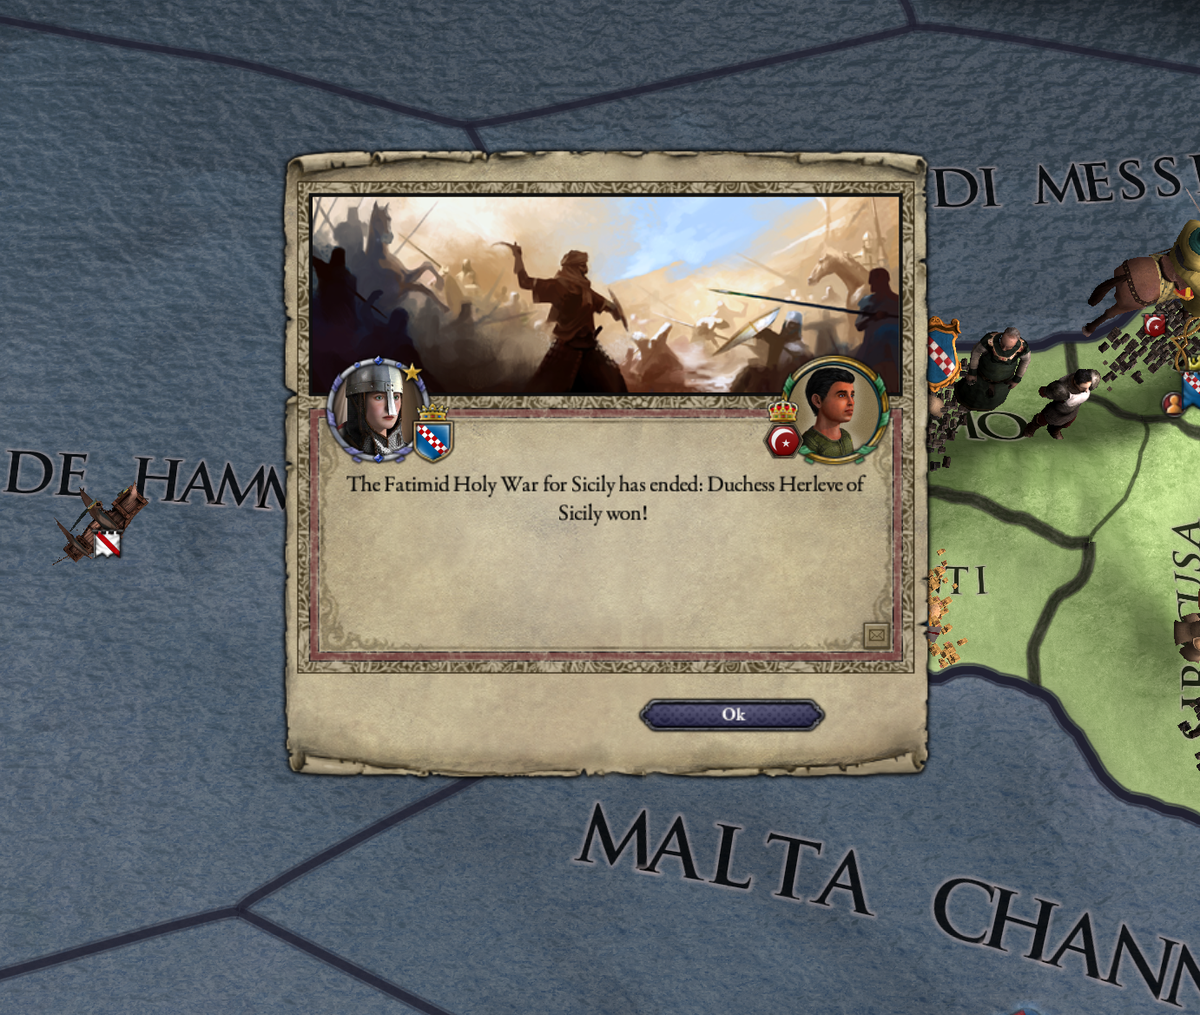 Deus has most definitely vulted.Cheers for the free piety, kid. Sorry I killed your dad. But he started it.